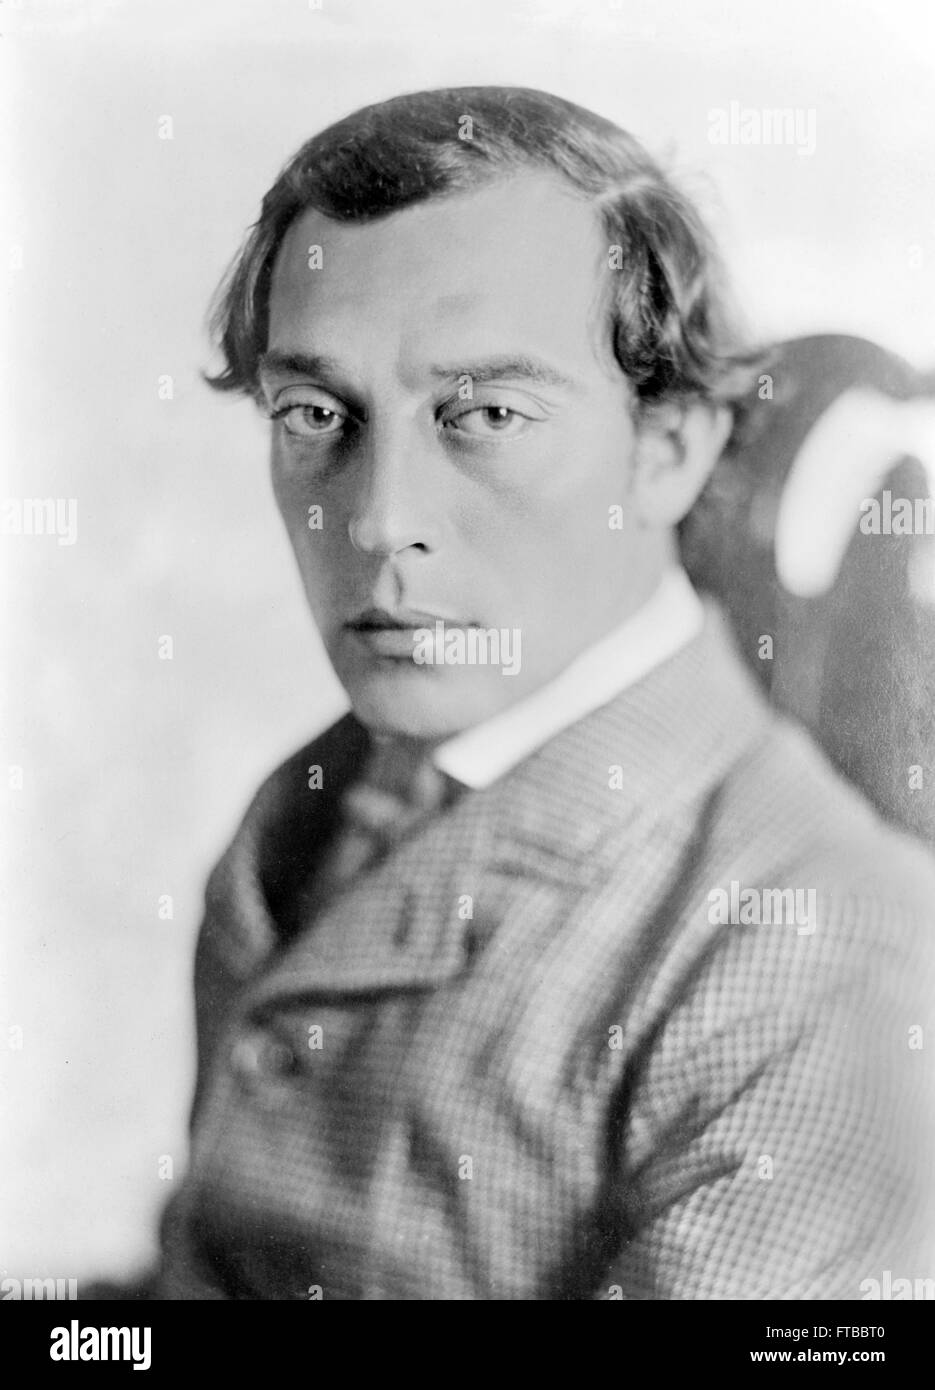 Buster Keaton. Portrait of the silent film star, Buster Keaton, in 'The General'. Stock Photo